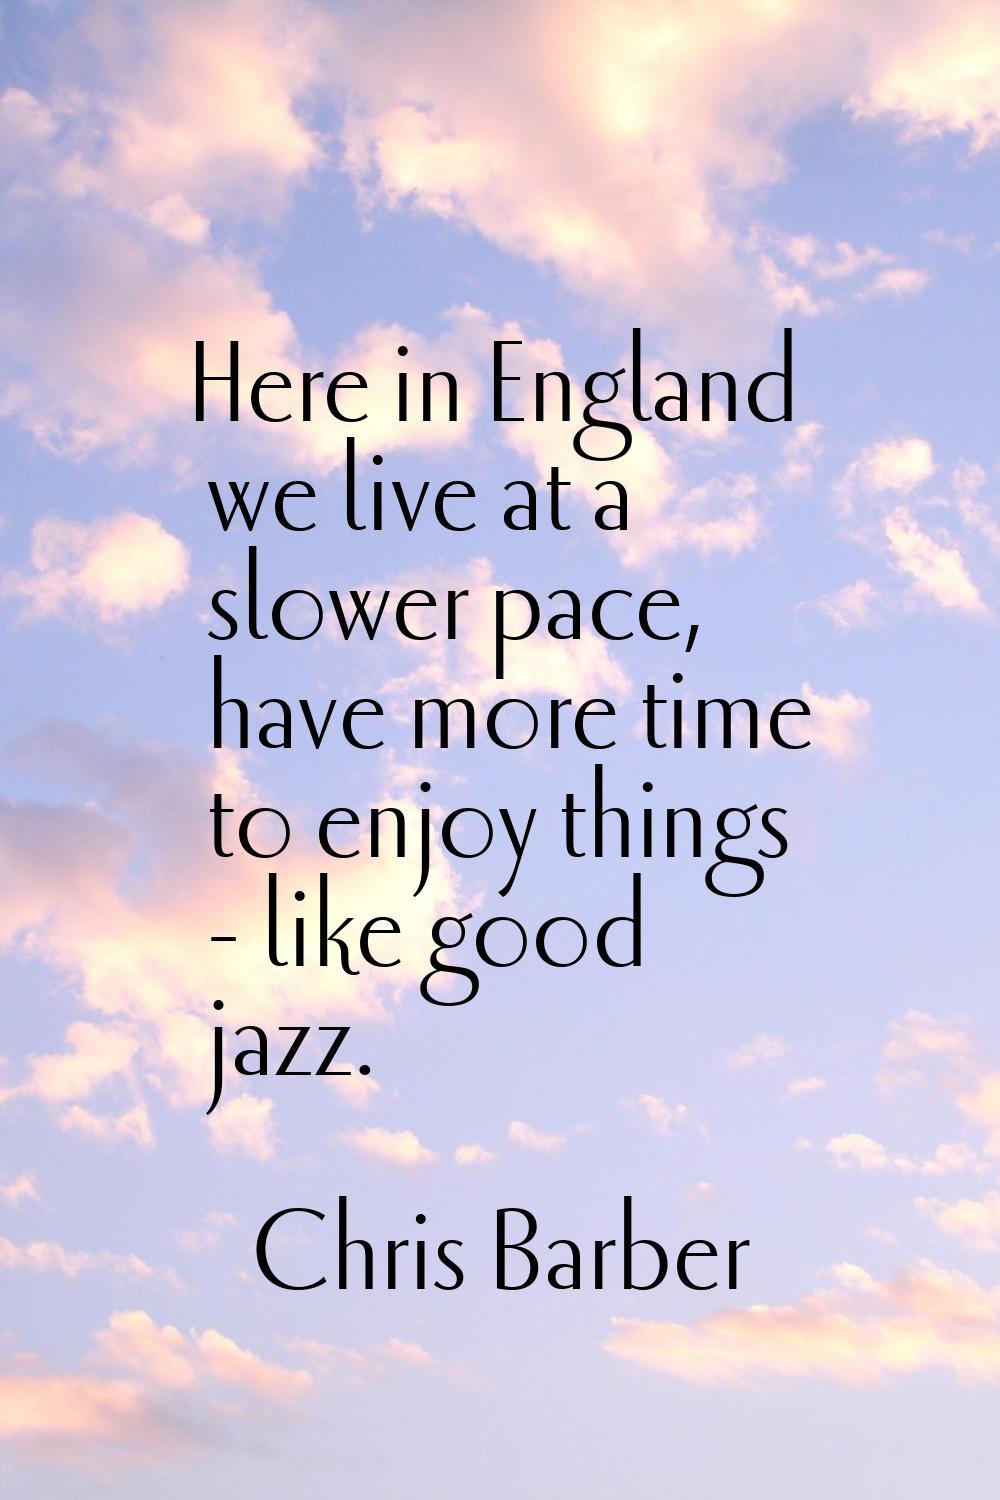 Here in England we live at a slower pace, have more time to enjoy things - like good jazz.